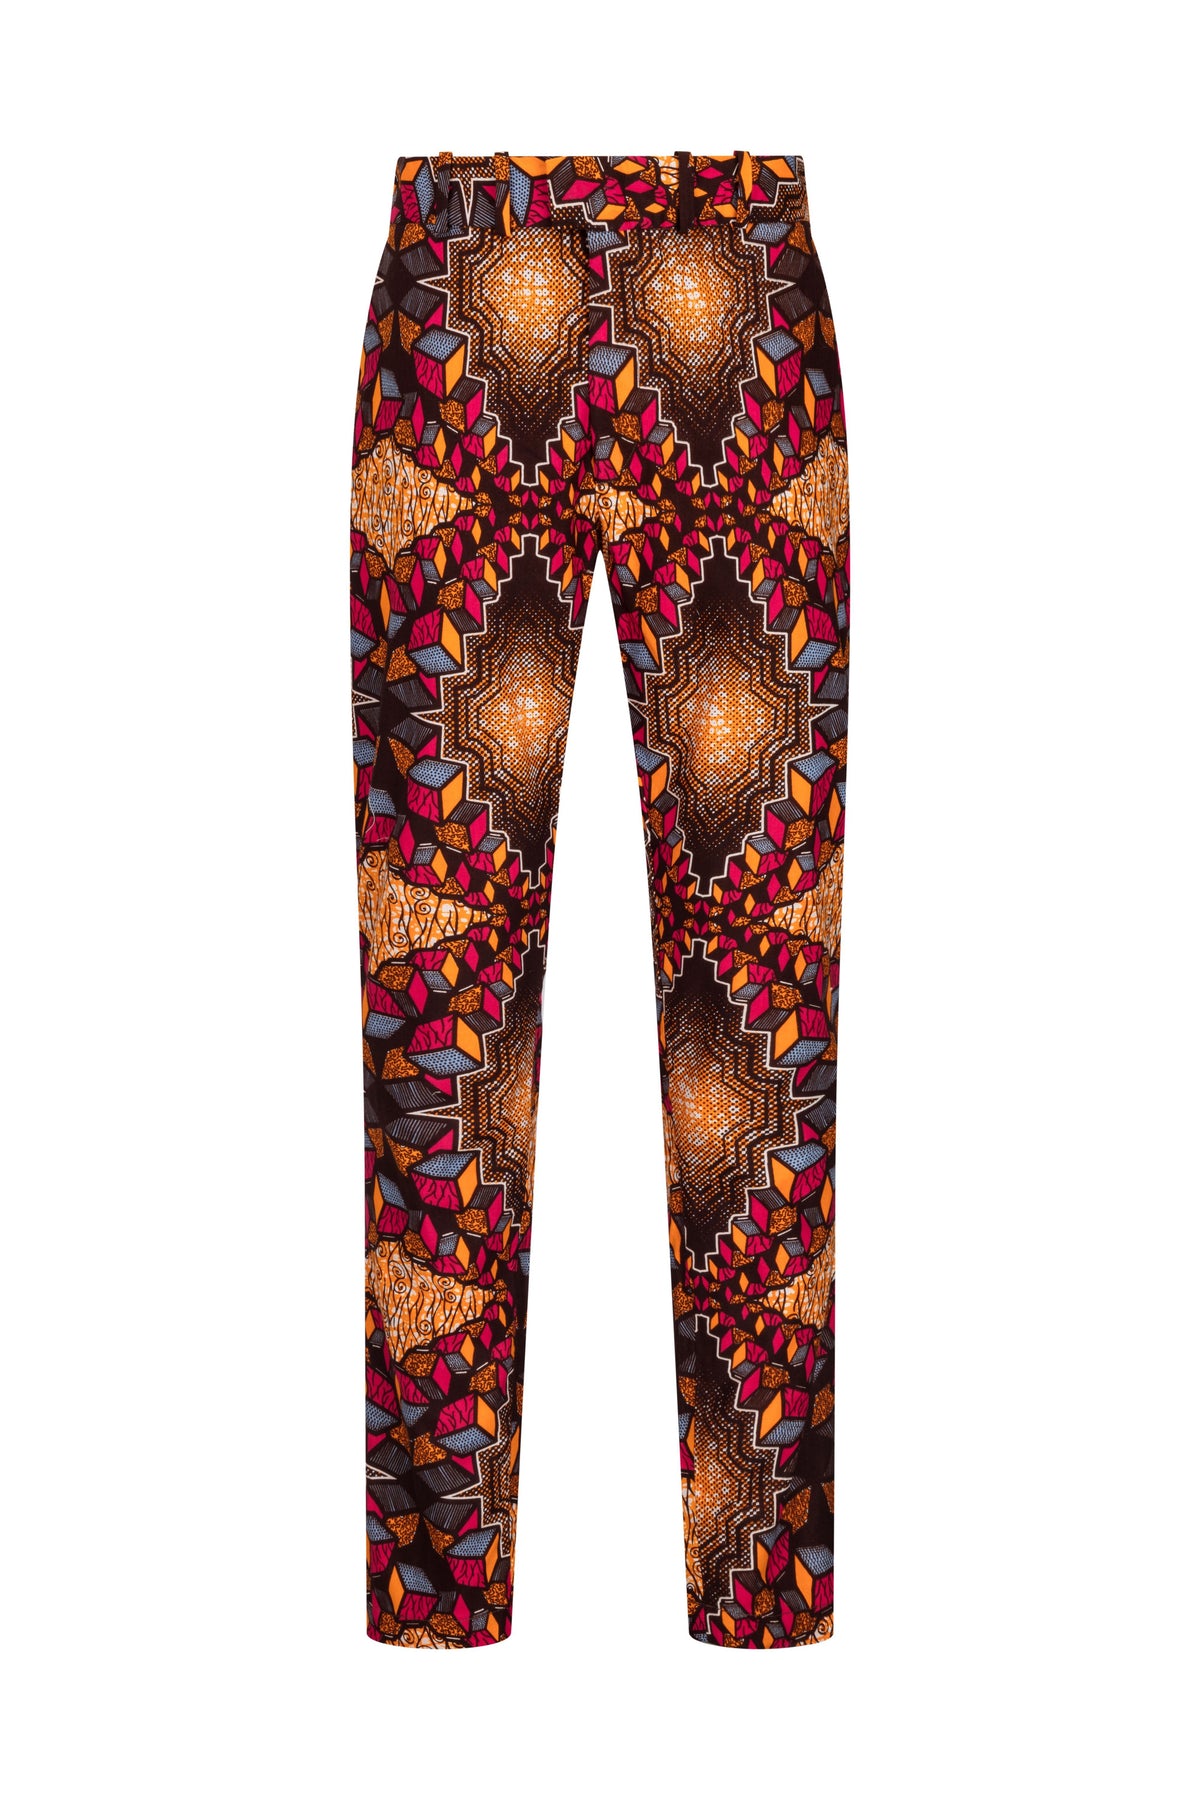 Men's African print straight leg trousers-Cubic - OHEMA OHENE AFRICAN INSPIRED FASHION